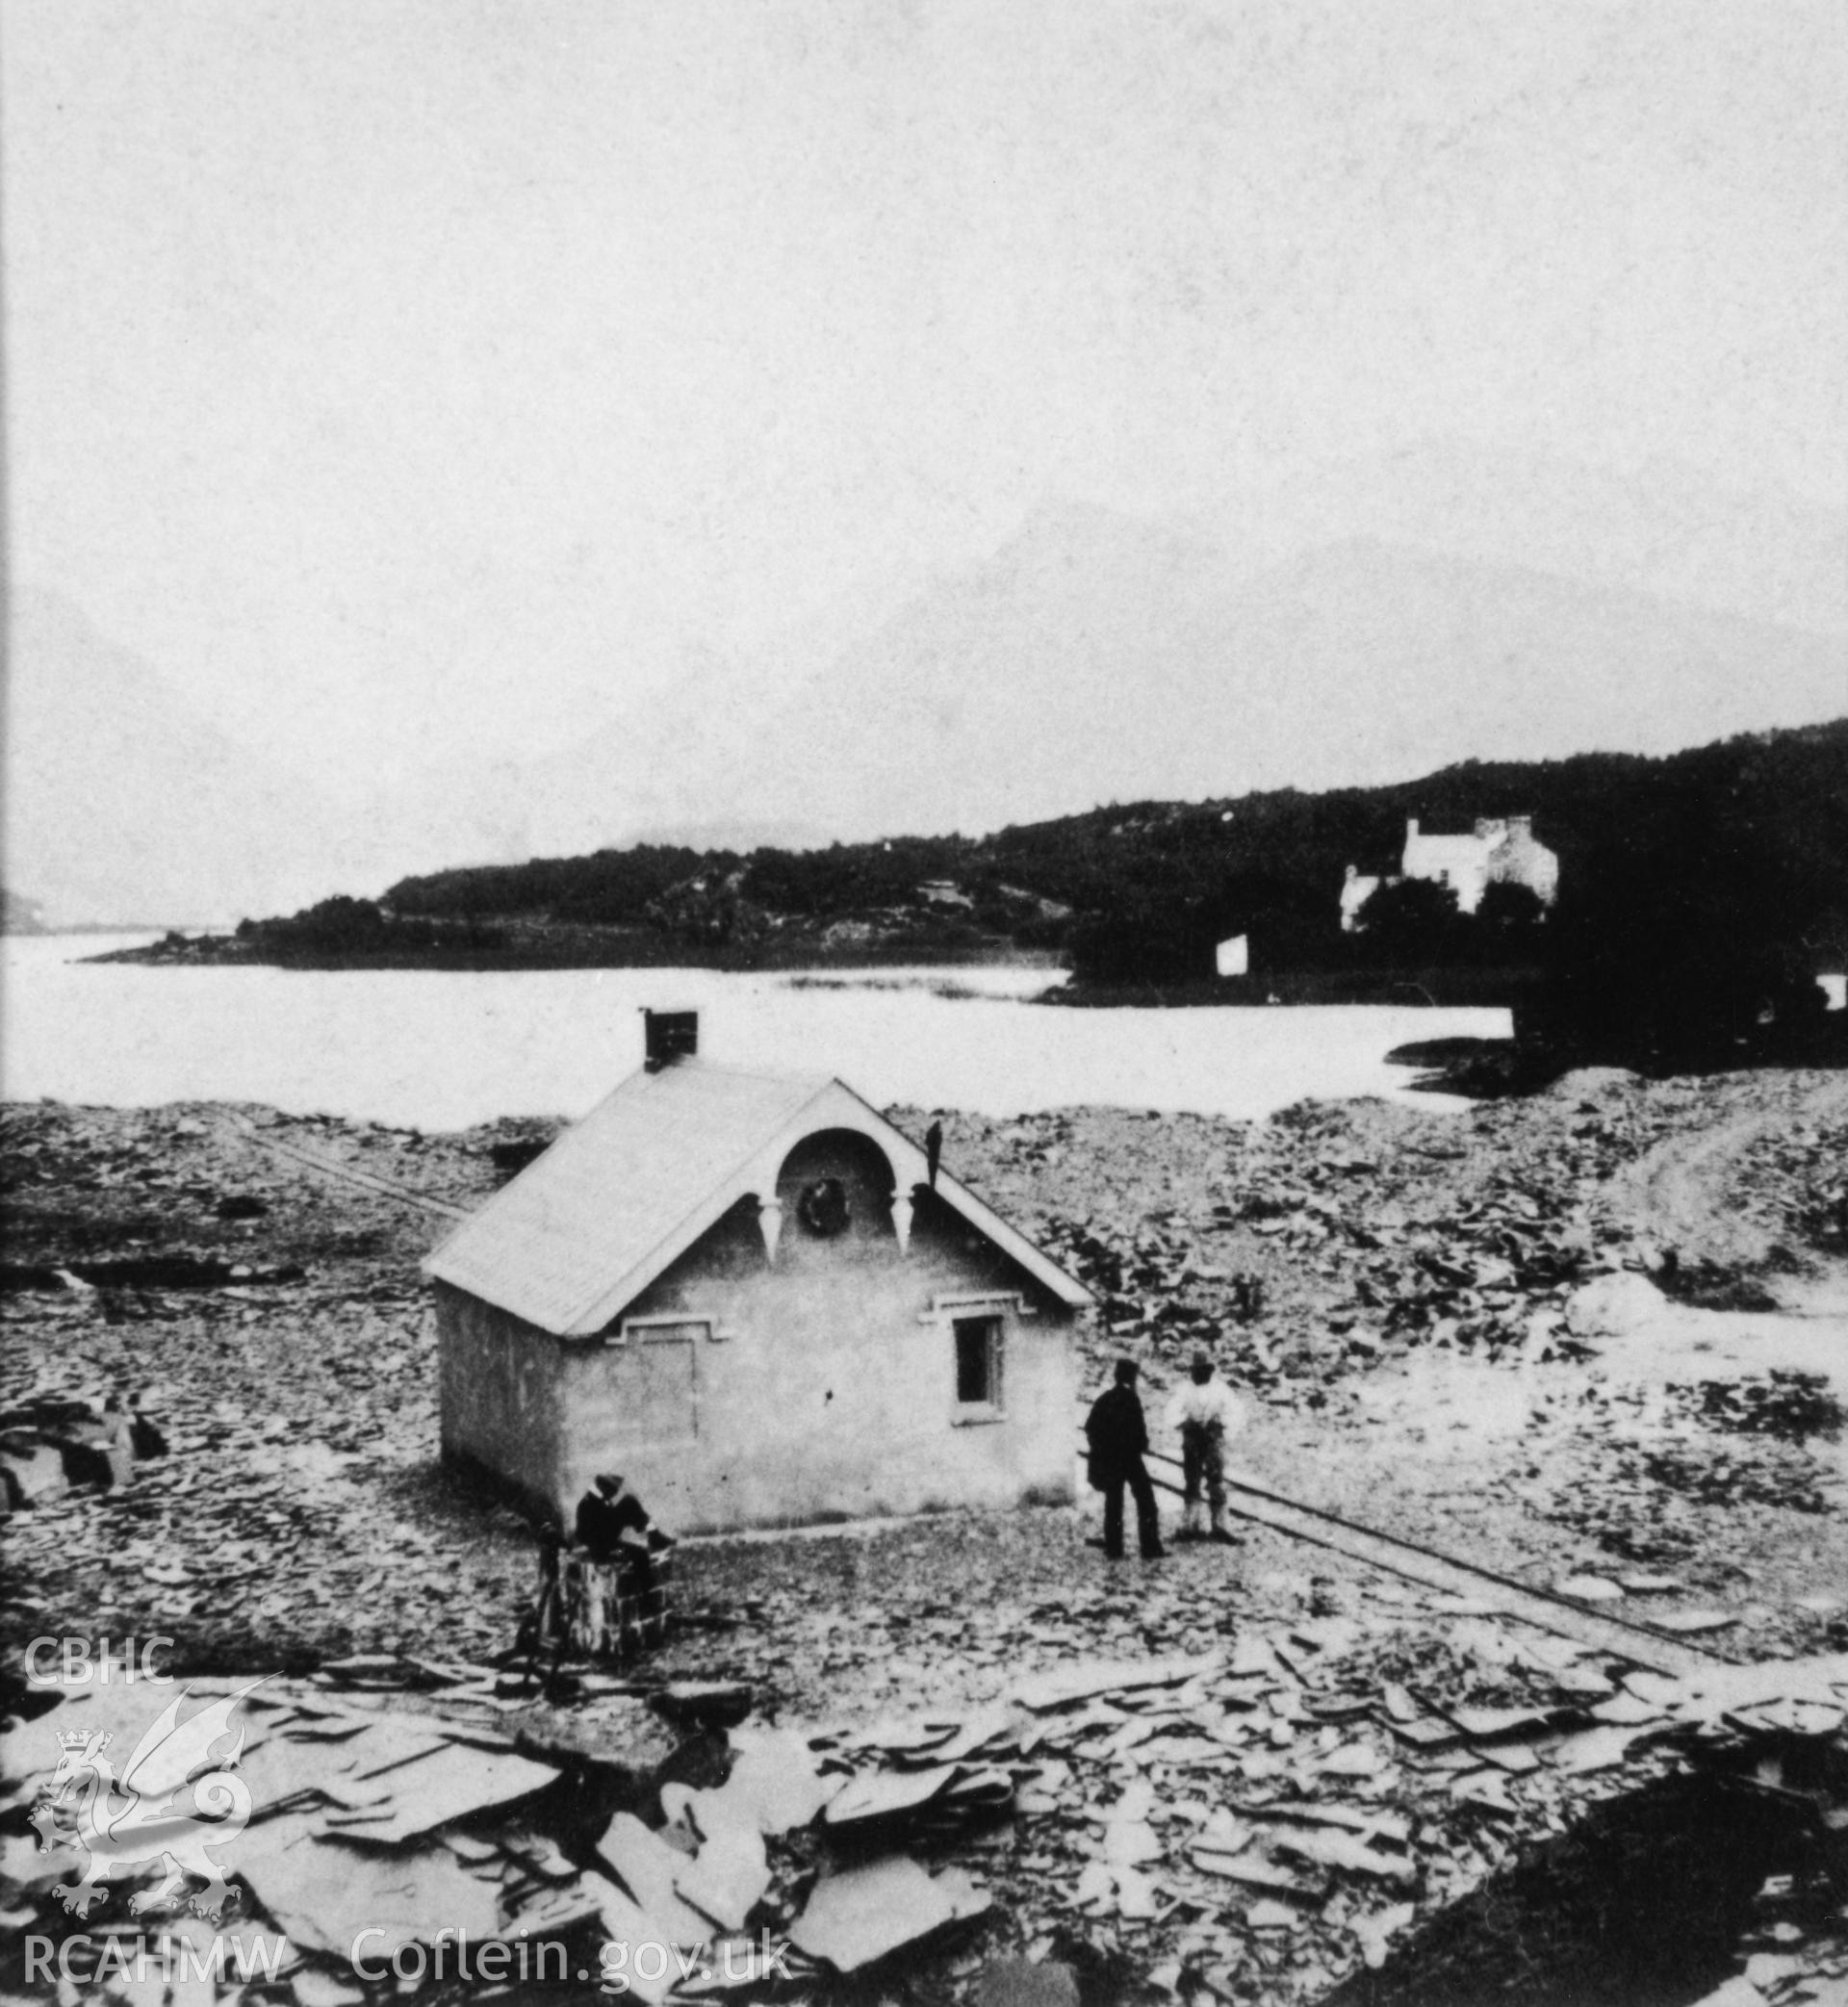 View of office at Glynrhonwy Quarry in 1860.